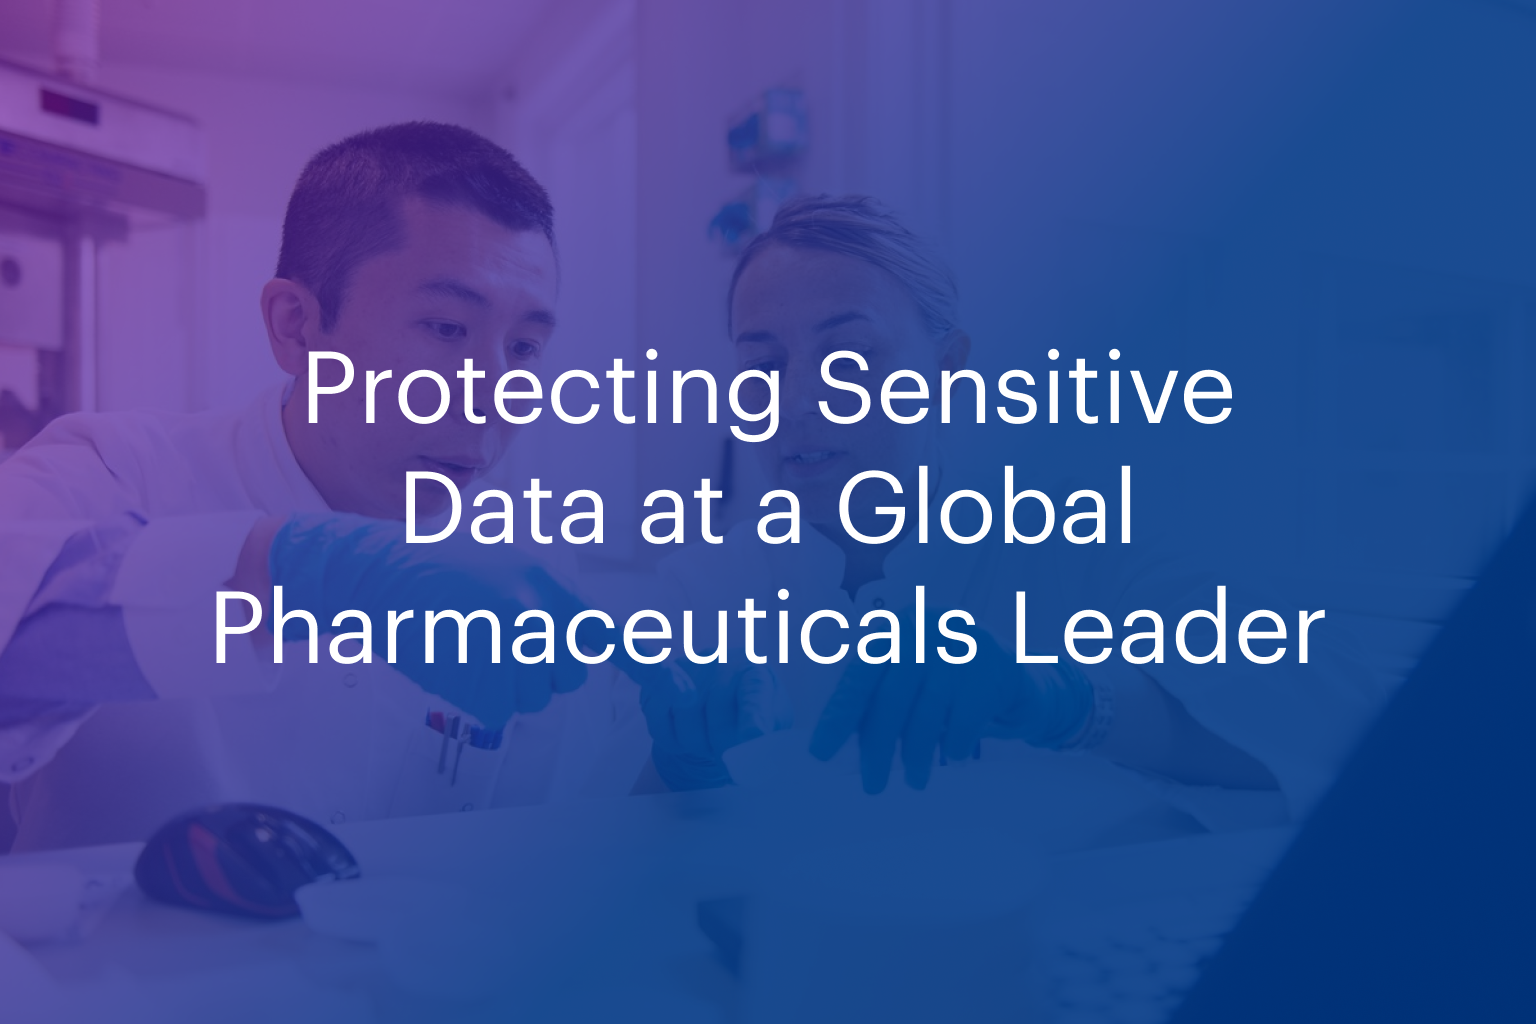 Global pharmaceuticals leader protects highly sensitive data in SaaS estate